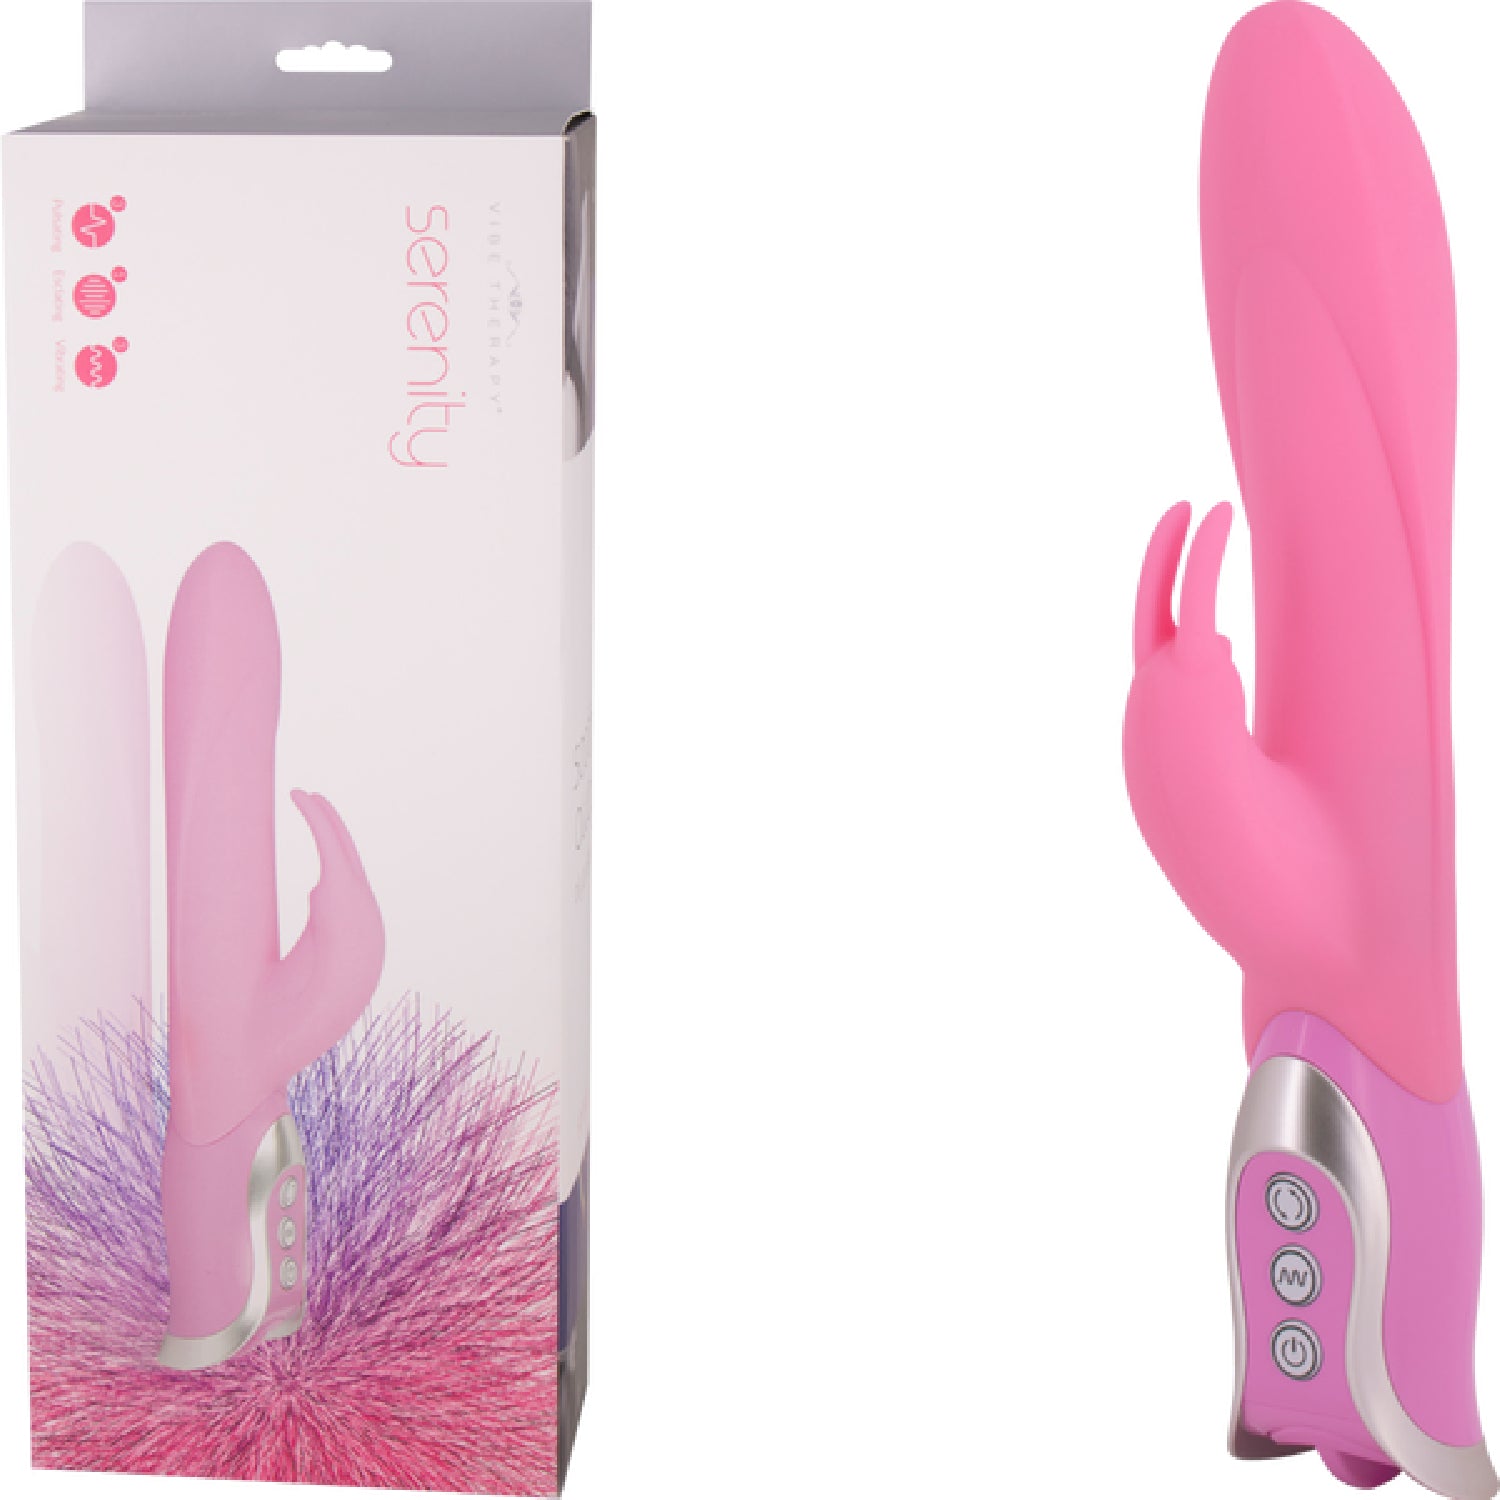 Serenity Fluted Head And Extended Clitoral Stimulator Rabbit Vibrator (Pink)  - Club X